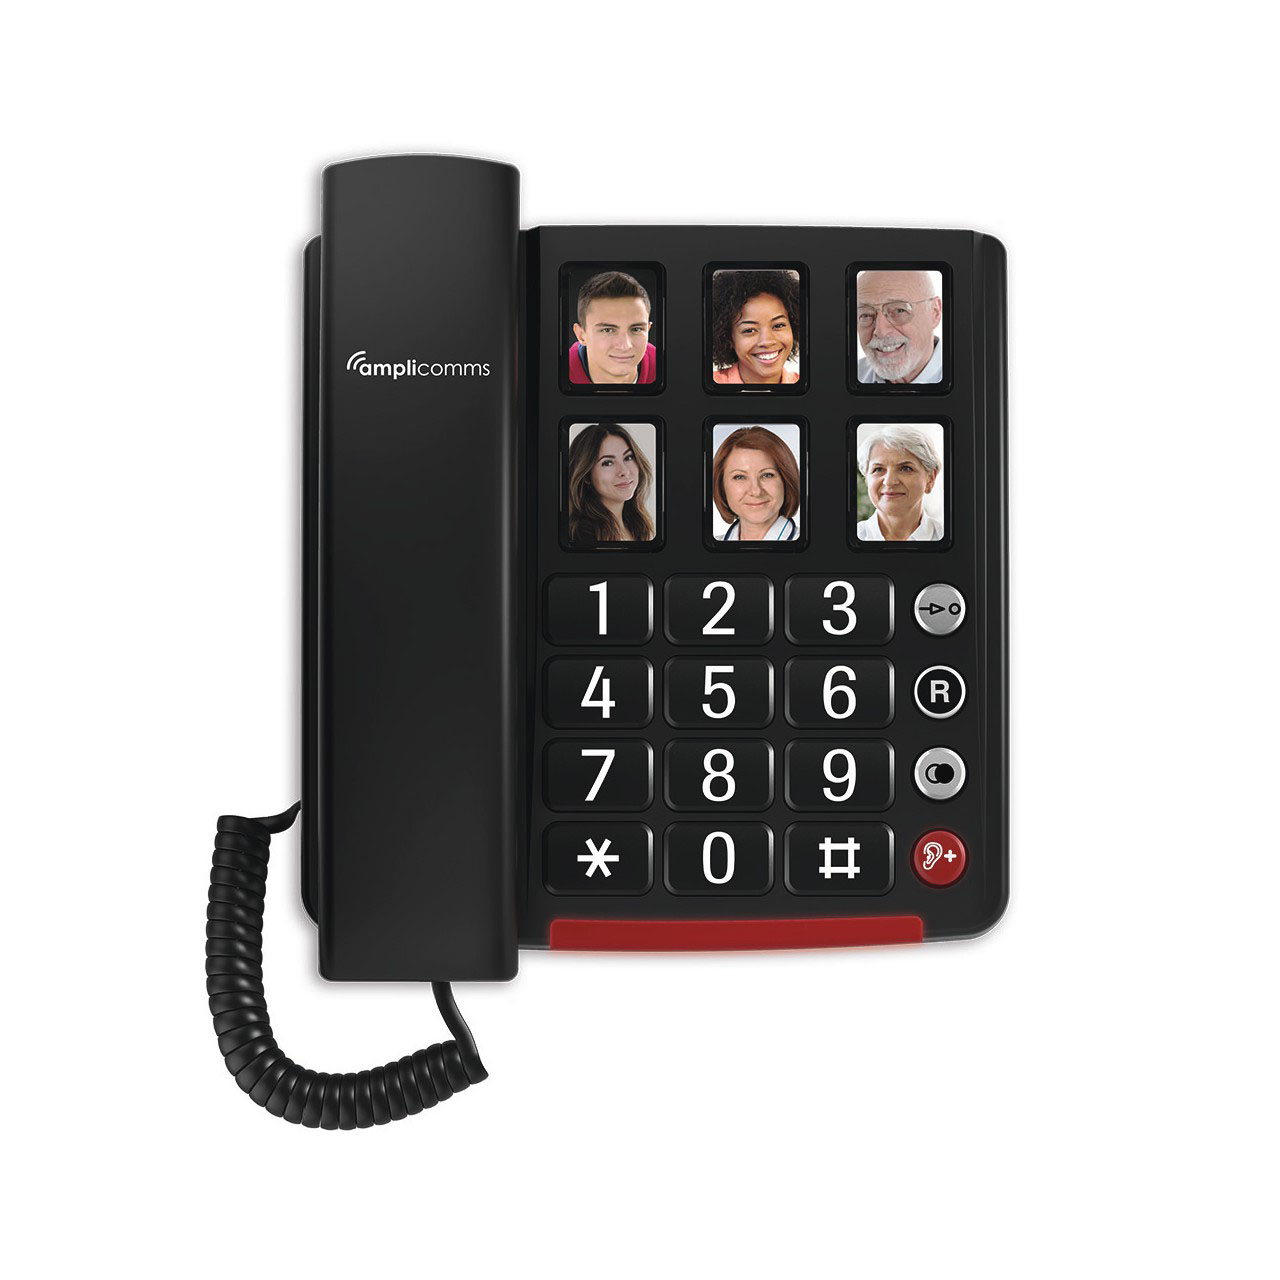 Amplicomm Large Display Corded Phone with Photo Memories